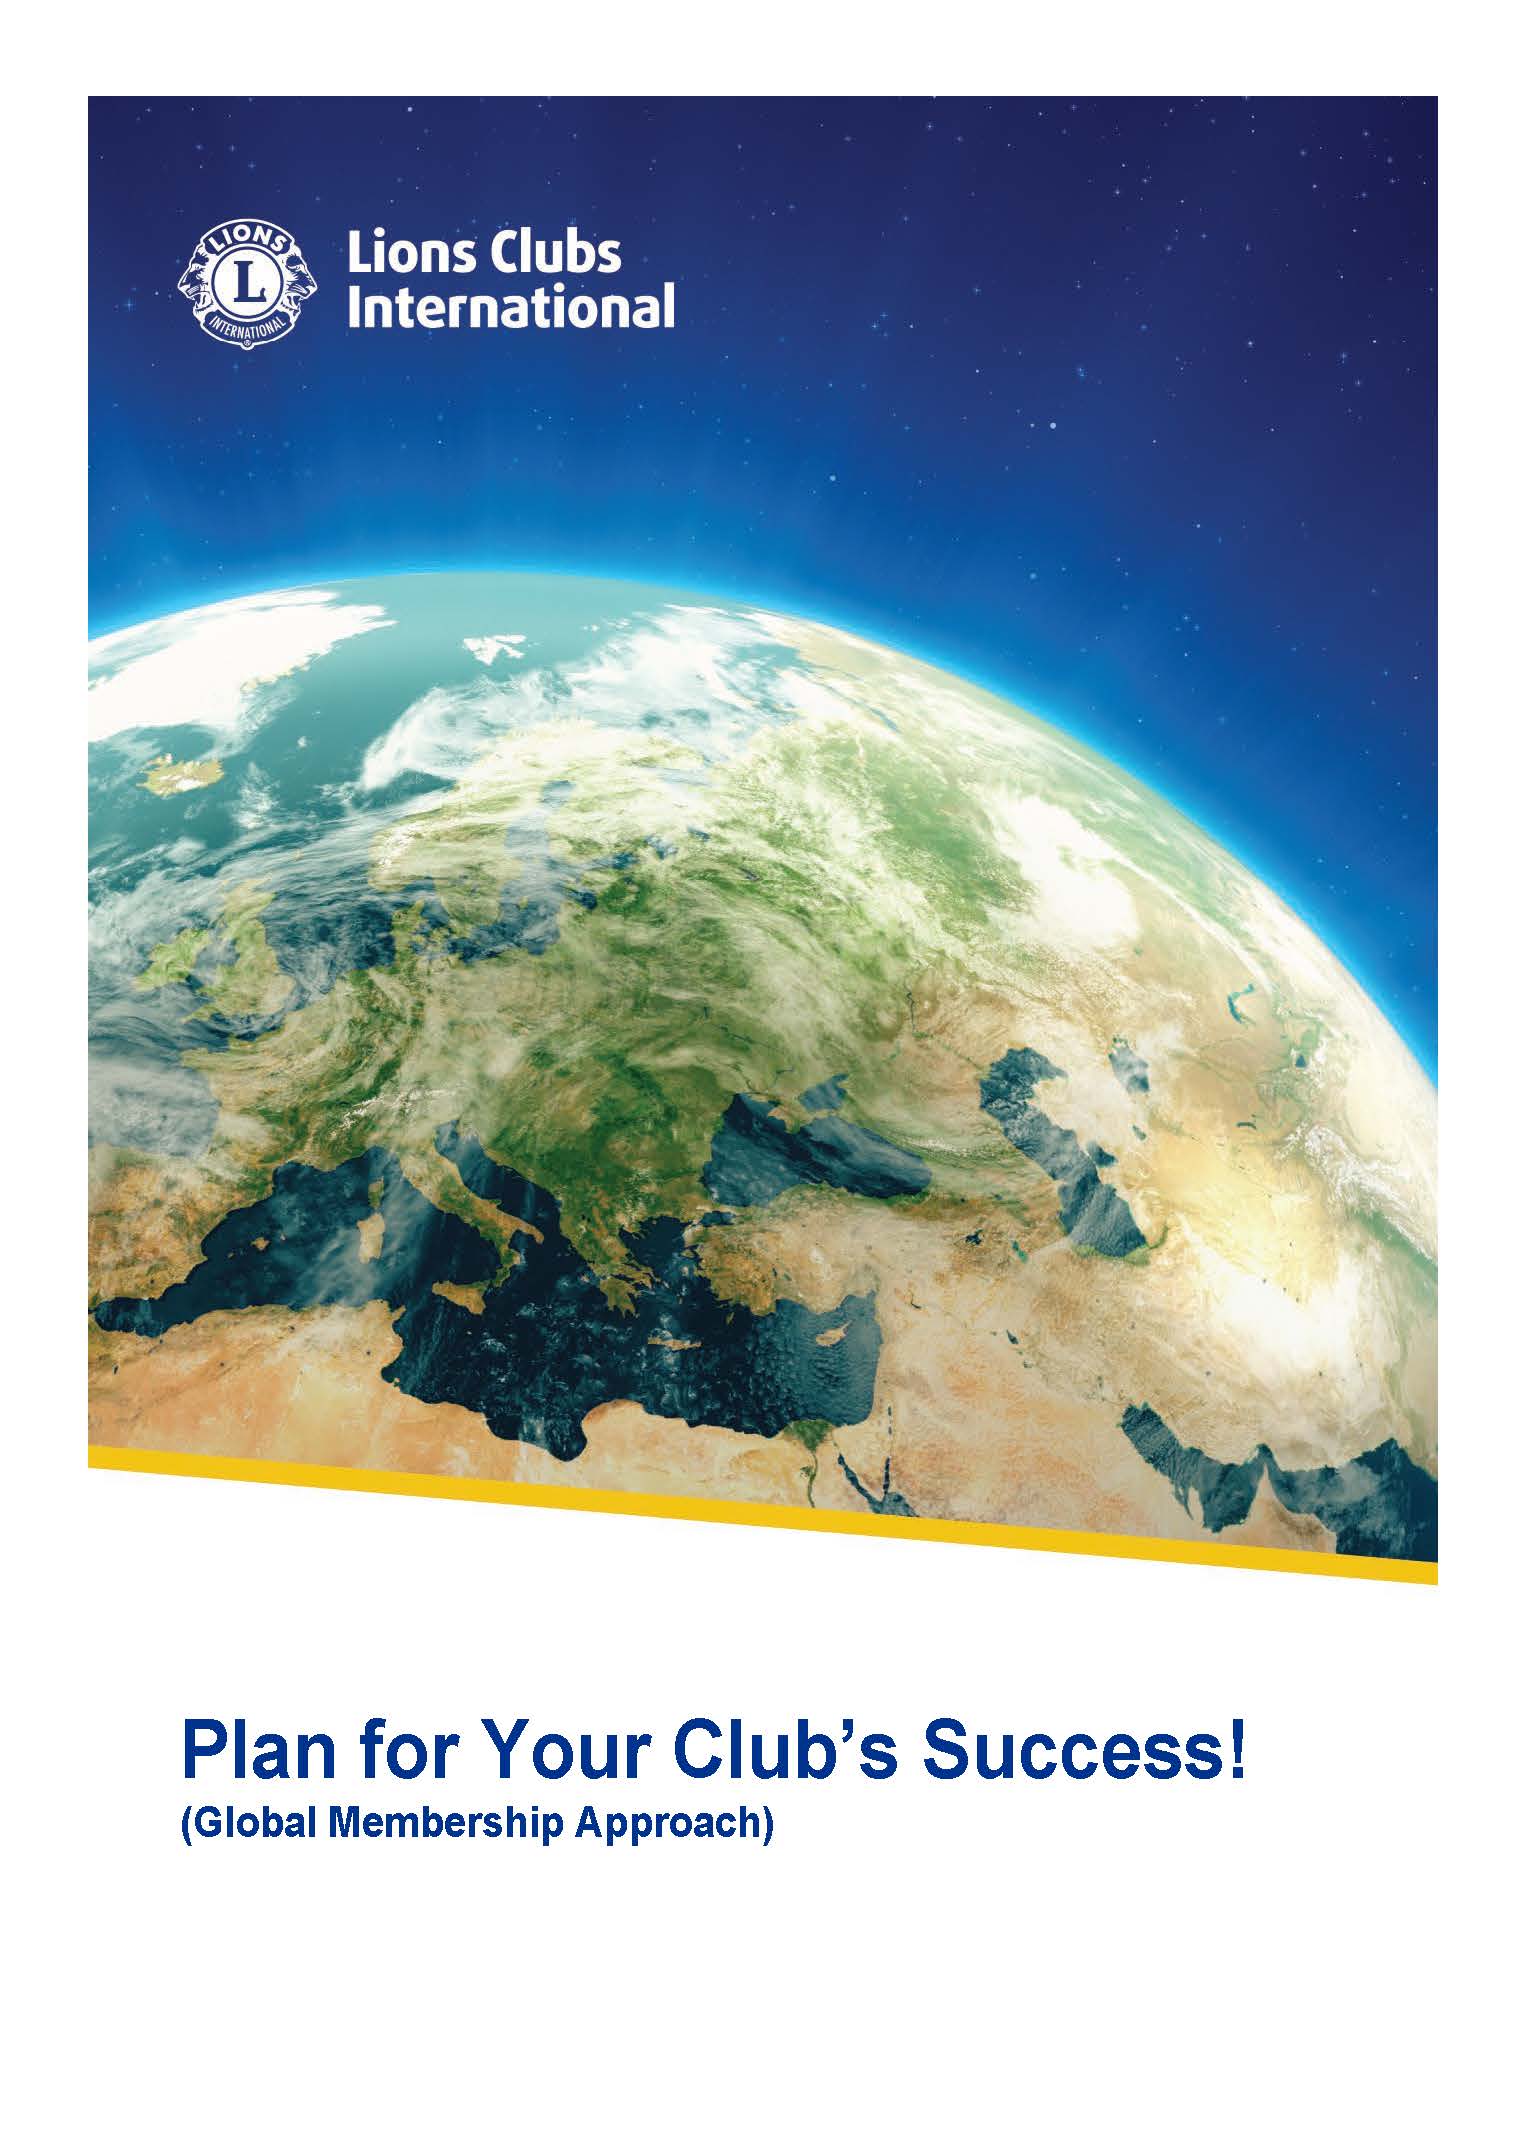 Build a Vision for Your Club